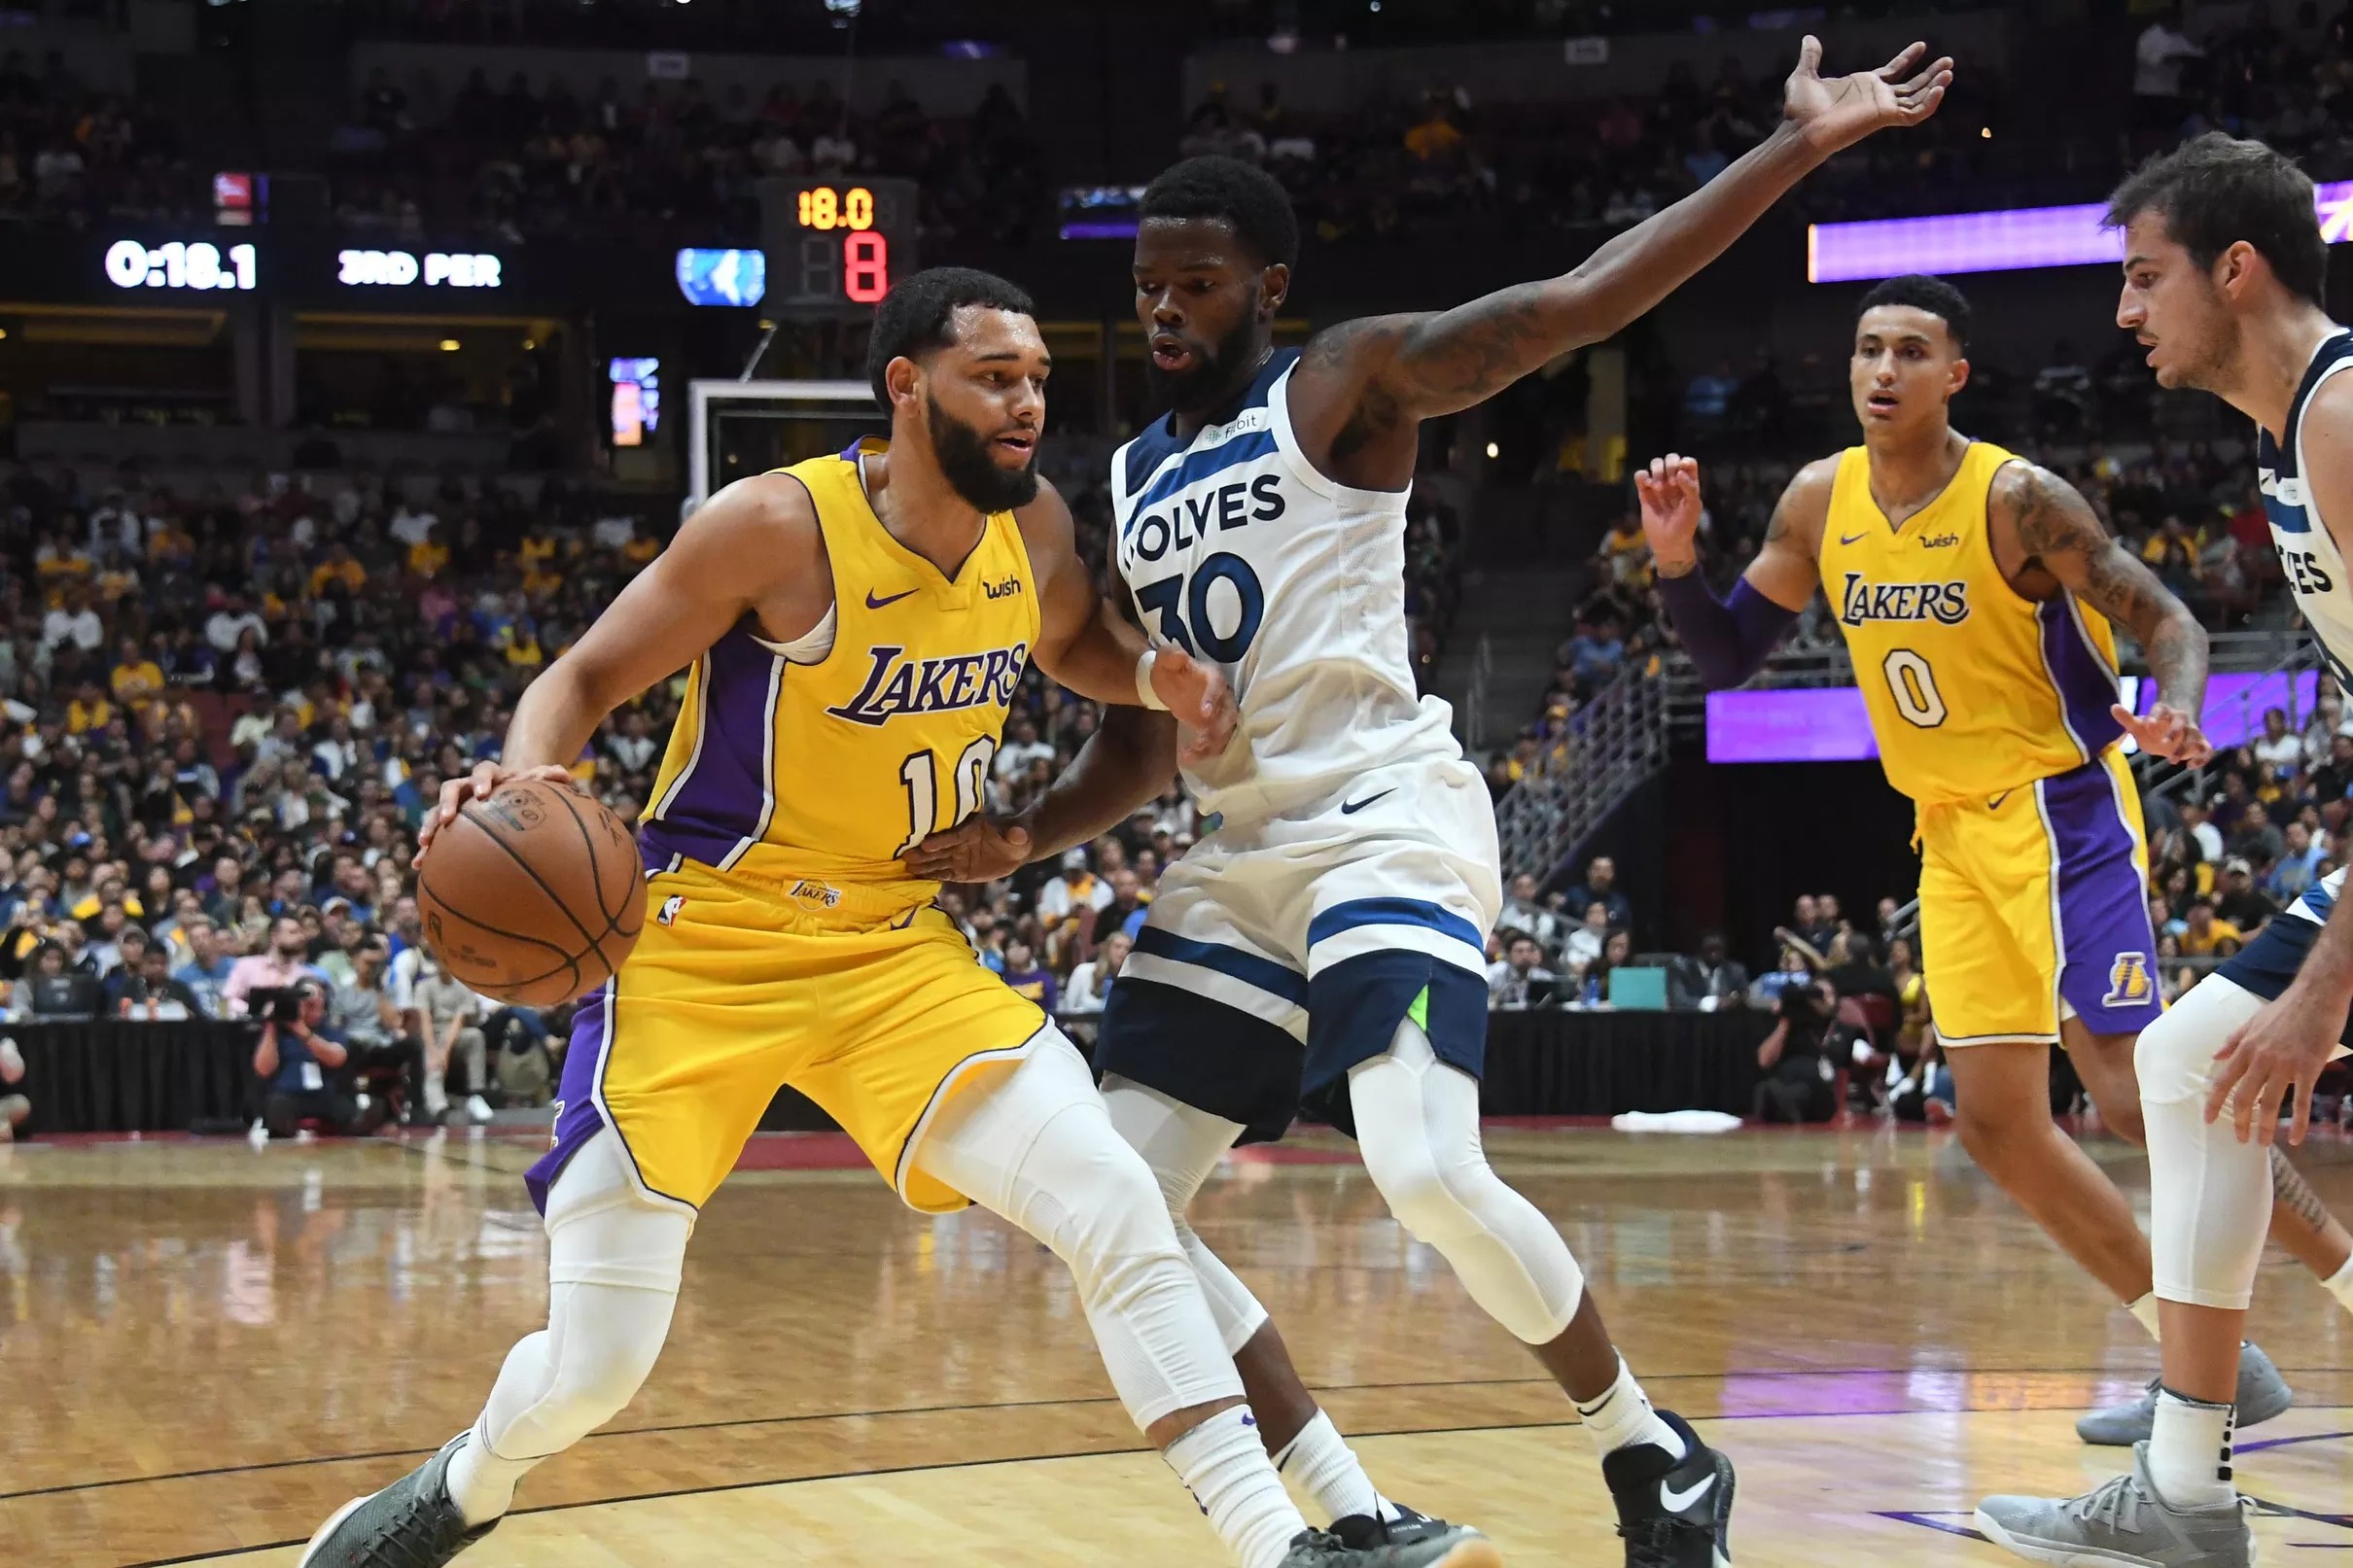 Lakers vs. Timberwolves Christmas Day start time, TV schedule and game